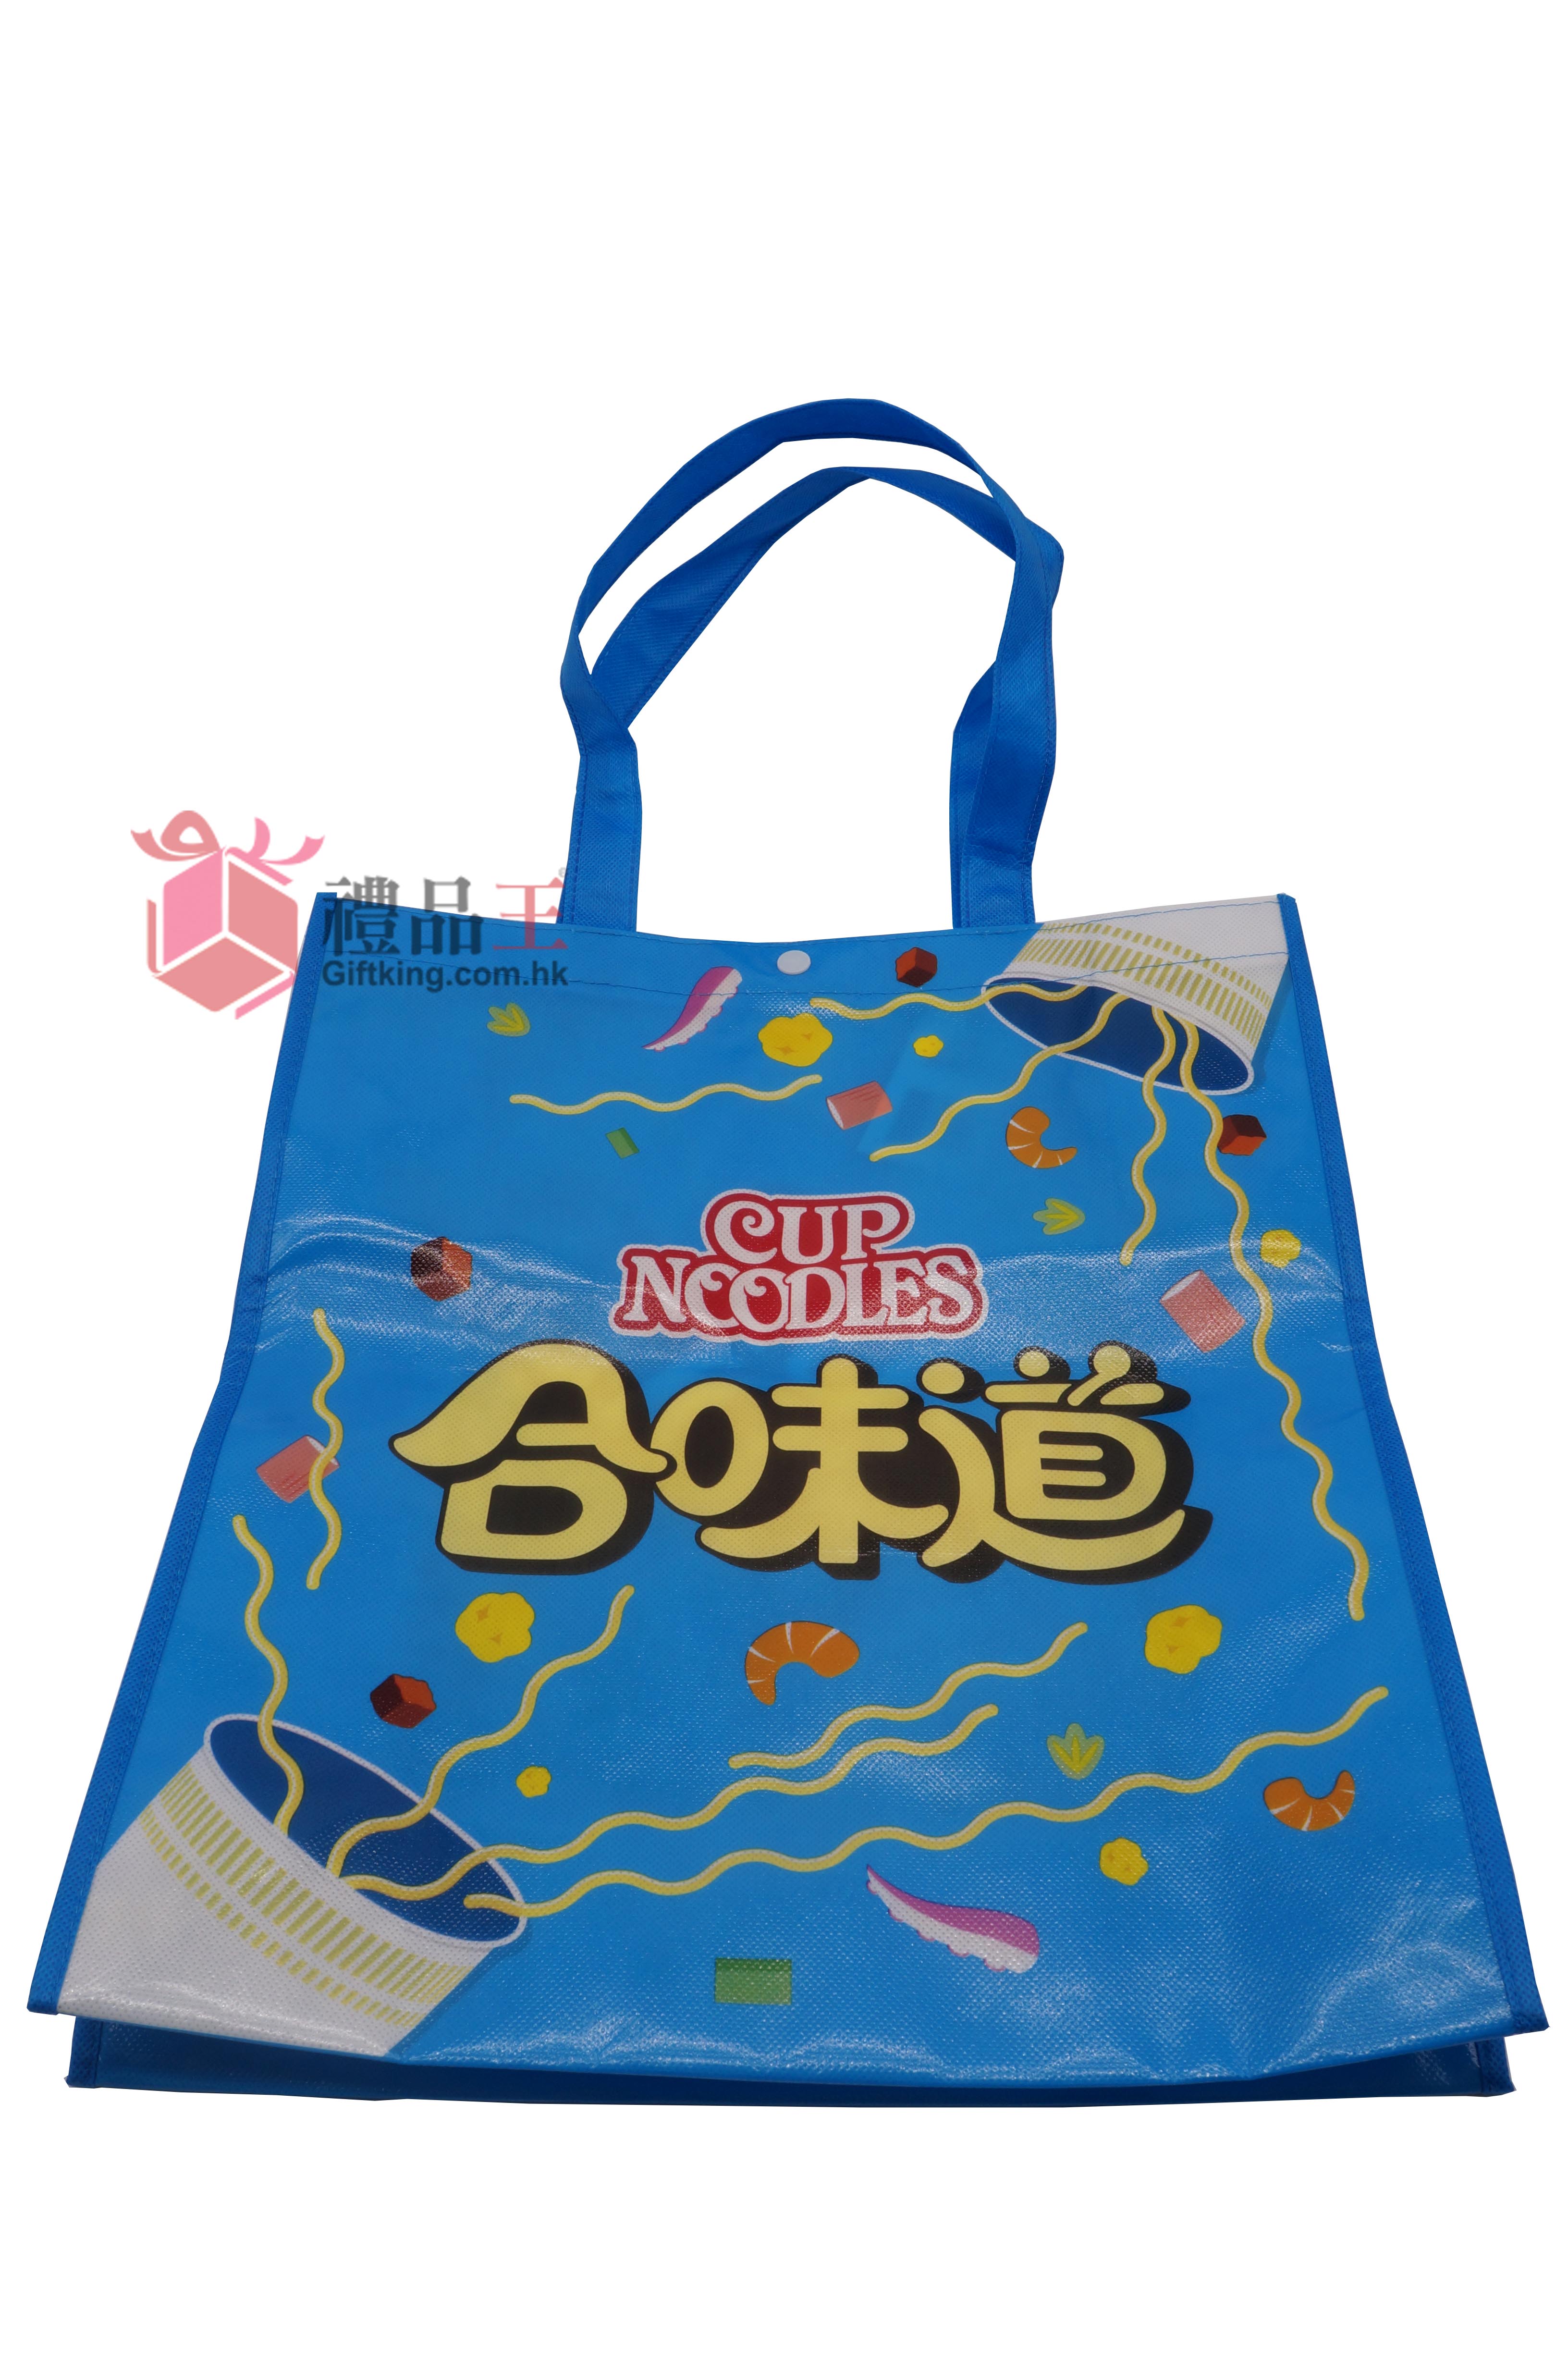 NISSIN Cup Noodles Recycle Bag (Environmental Gift)